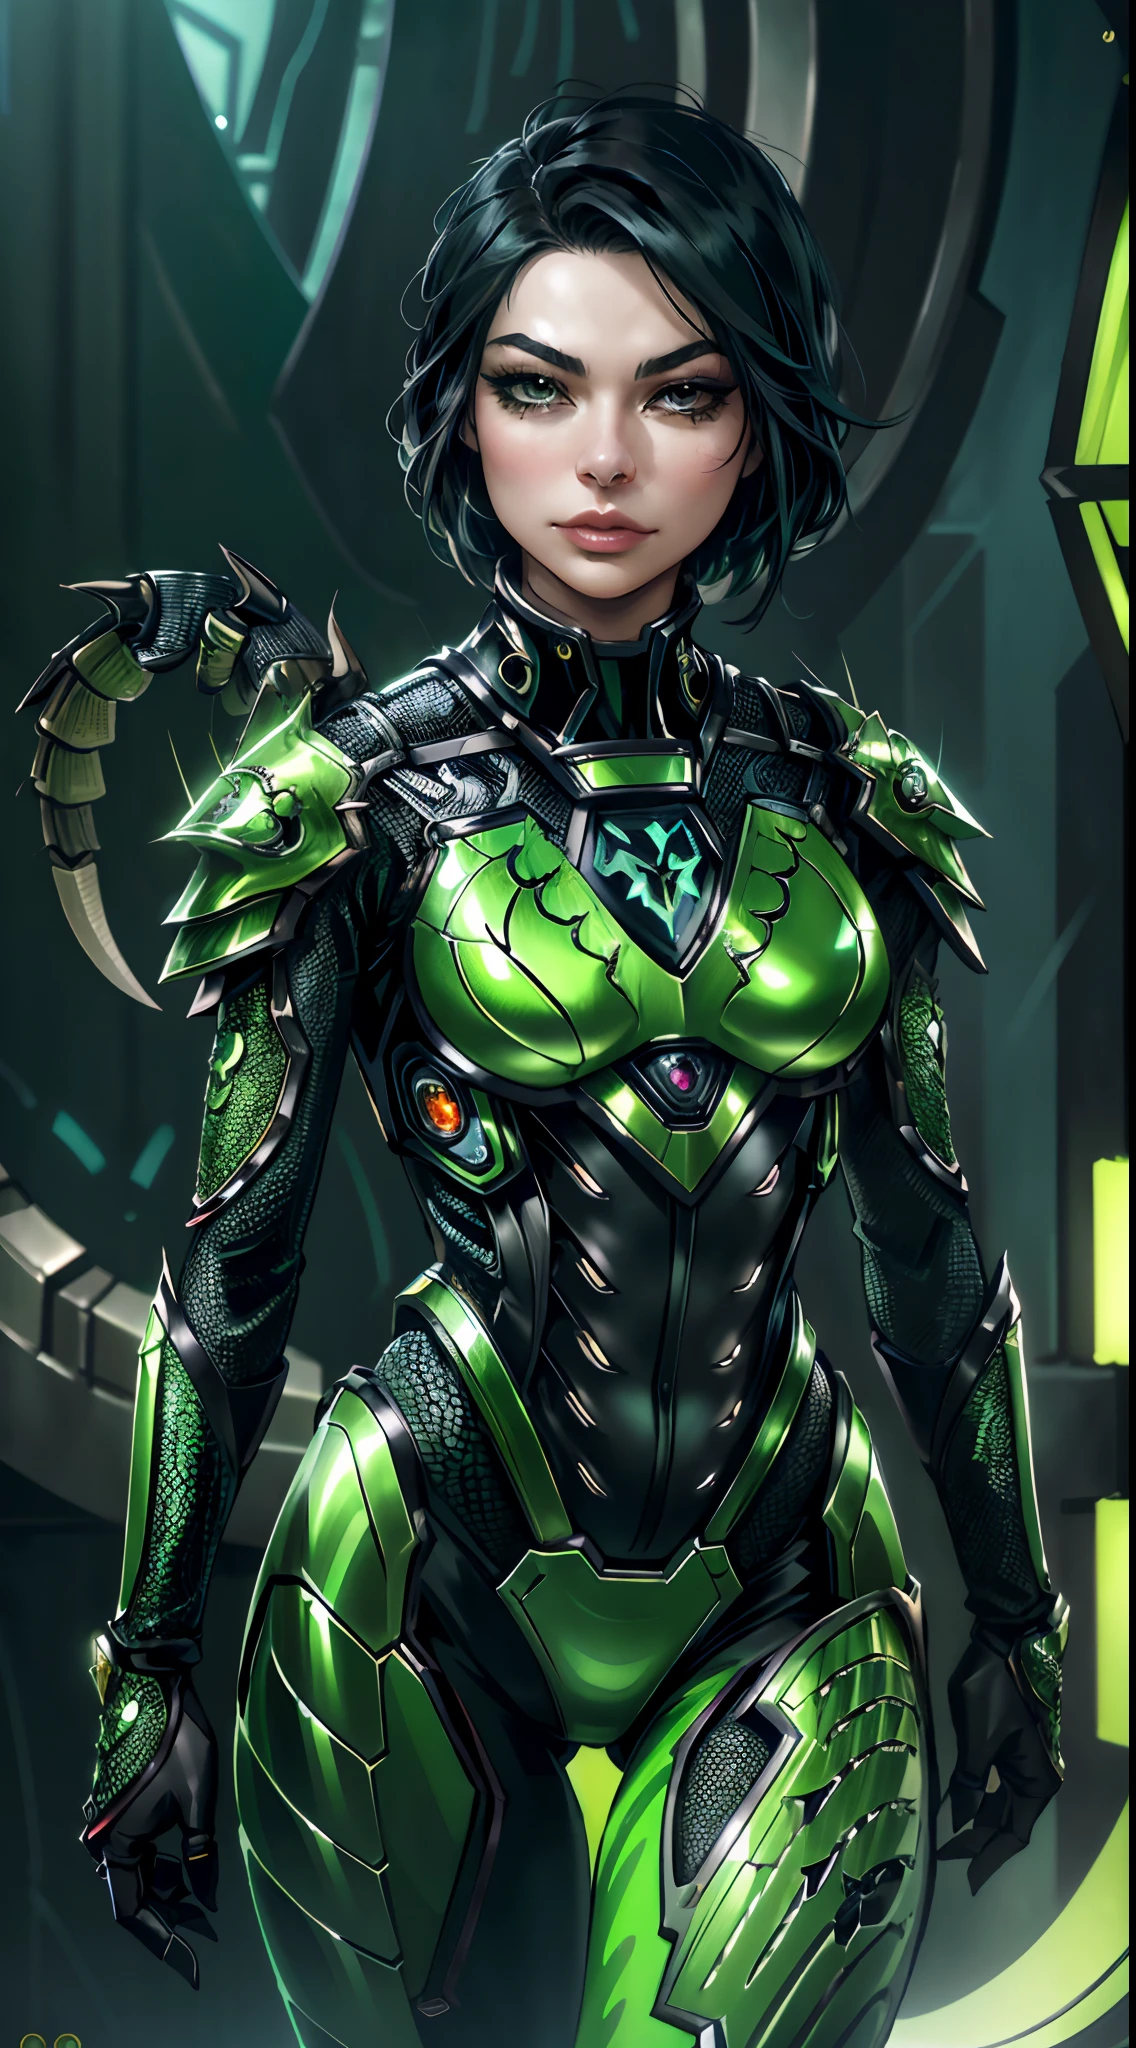 extremely detailed 8k wallpaper, intricate, richly detailed, dramatic, ((Miranda Cosgrove)), (((anthropomorphic scorpio woman))), wears green mechanical suit, ((mechanical scorpion tail)), wields knives, assassin, makeup, fit, seductive, sexy, hot, sultry, shapely, ready for combat, sinister face, graphics insanely, light is reflected in the ornaments, whole person with some distance from the surroundings